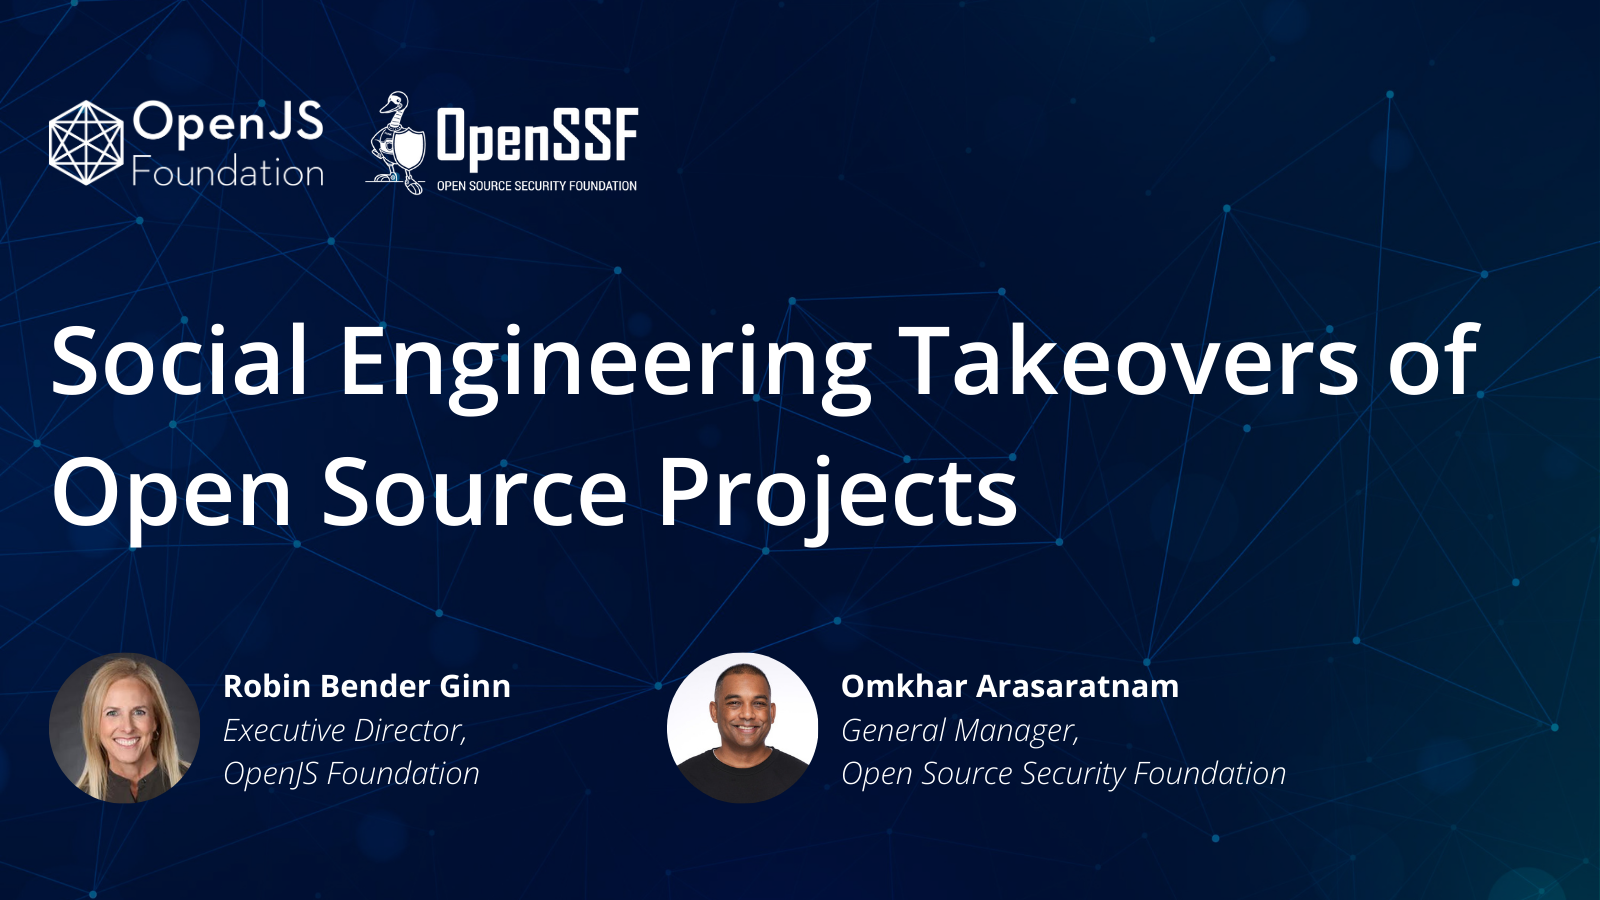 Social engineering takeovers of open source projects by the OpenJS Foundation and OpenSSF.